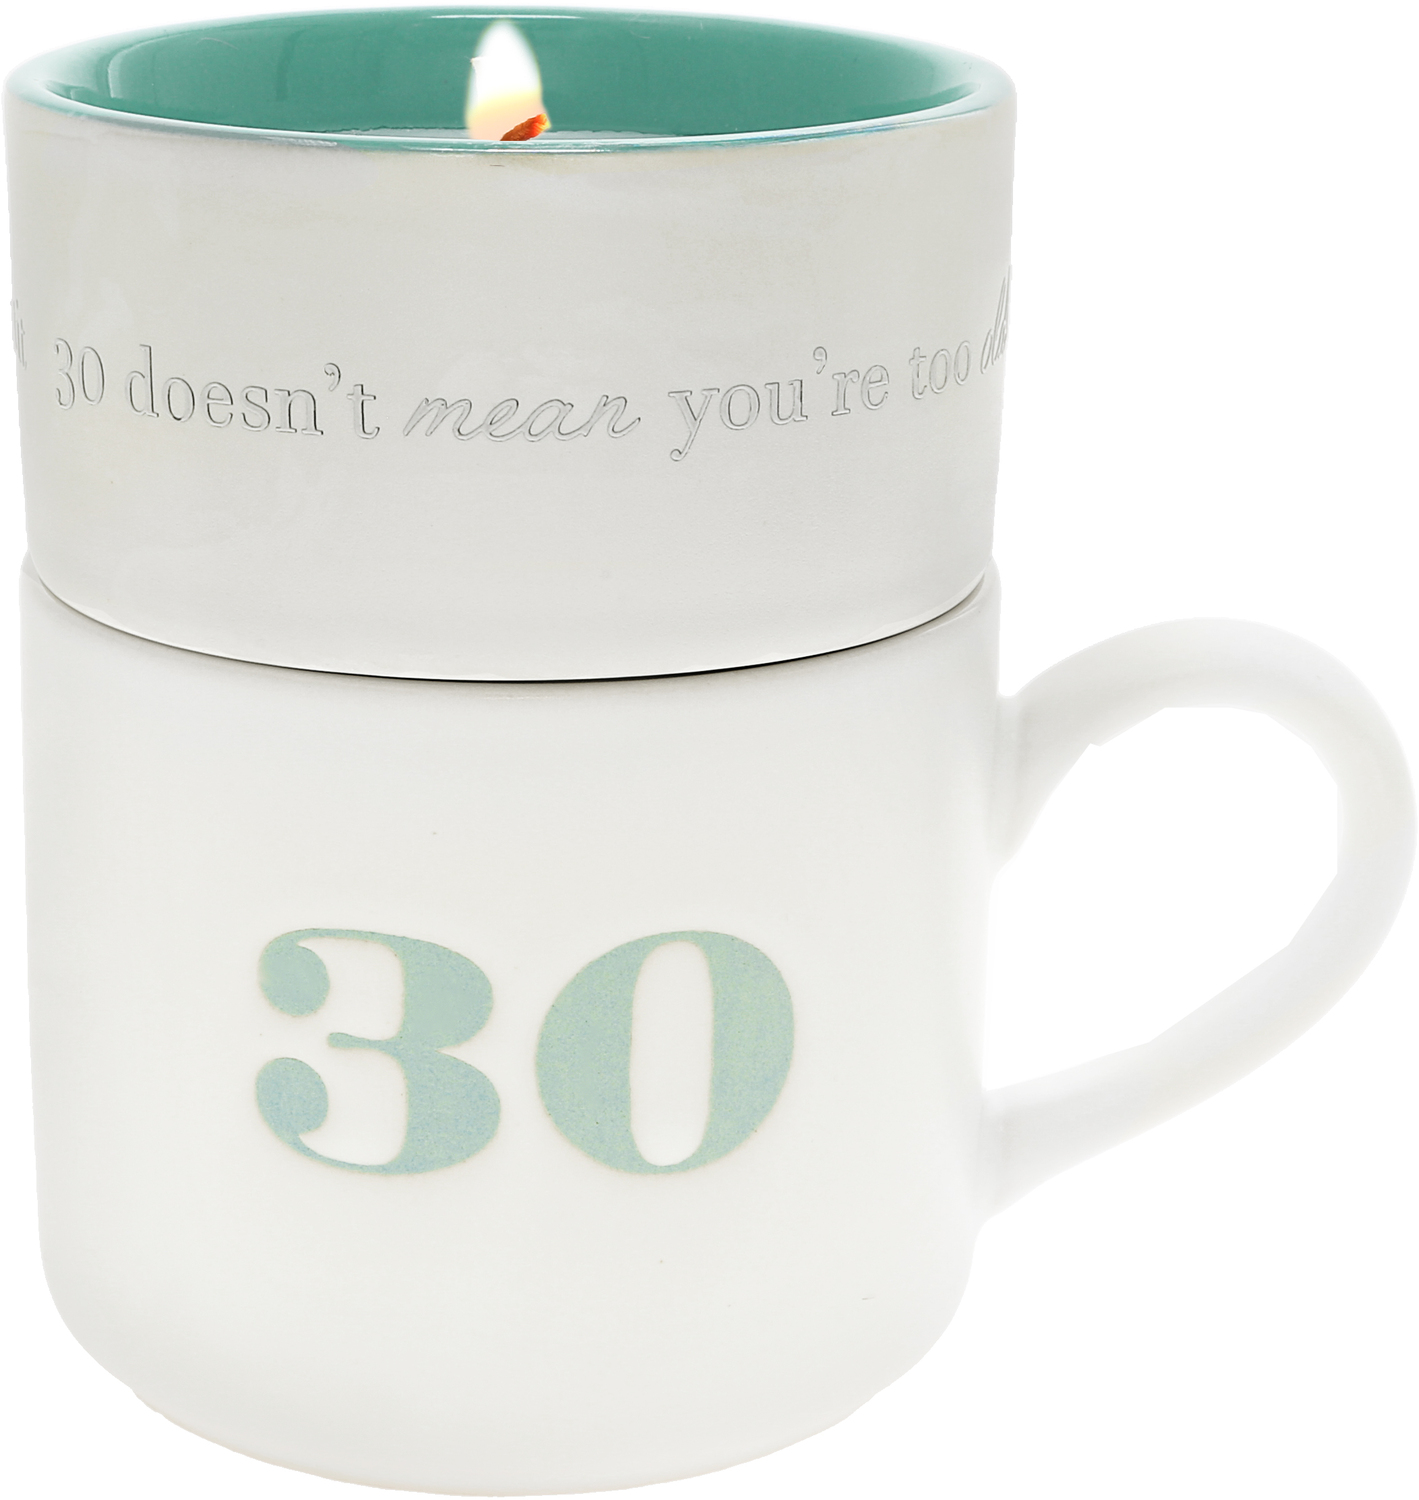 30 by Filled with Warmth - 30 - Stacking Mug and Candle Set
100% Soy Wax Scent: Tranquility